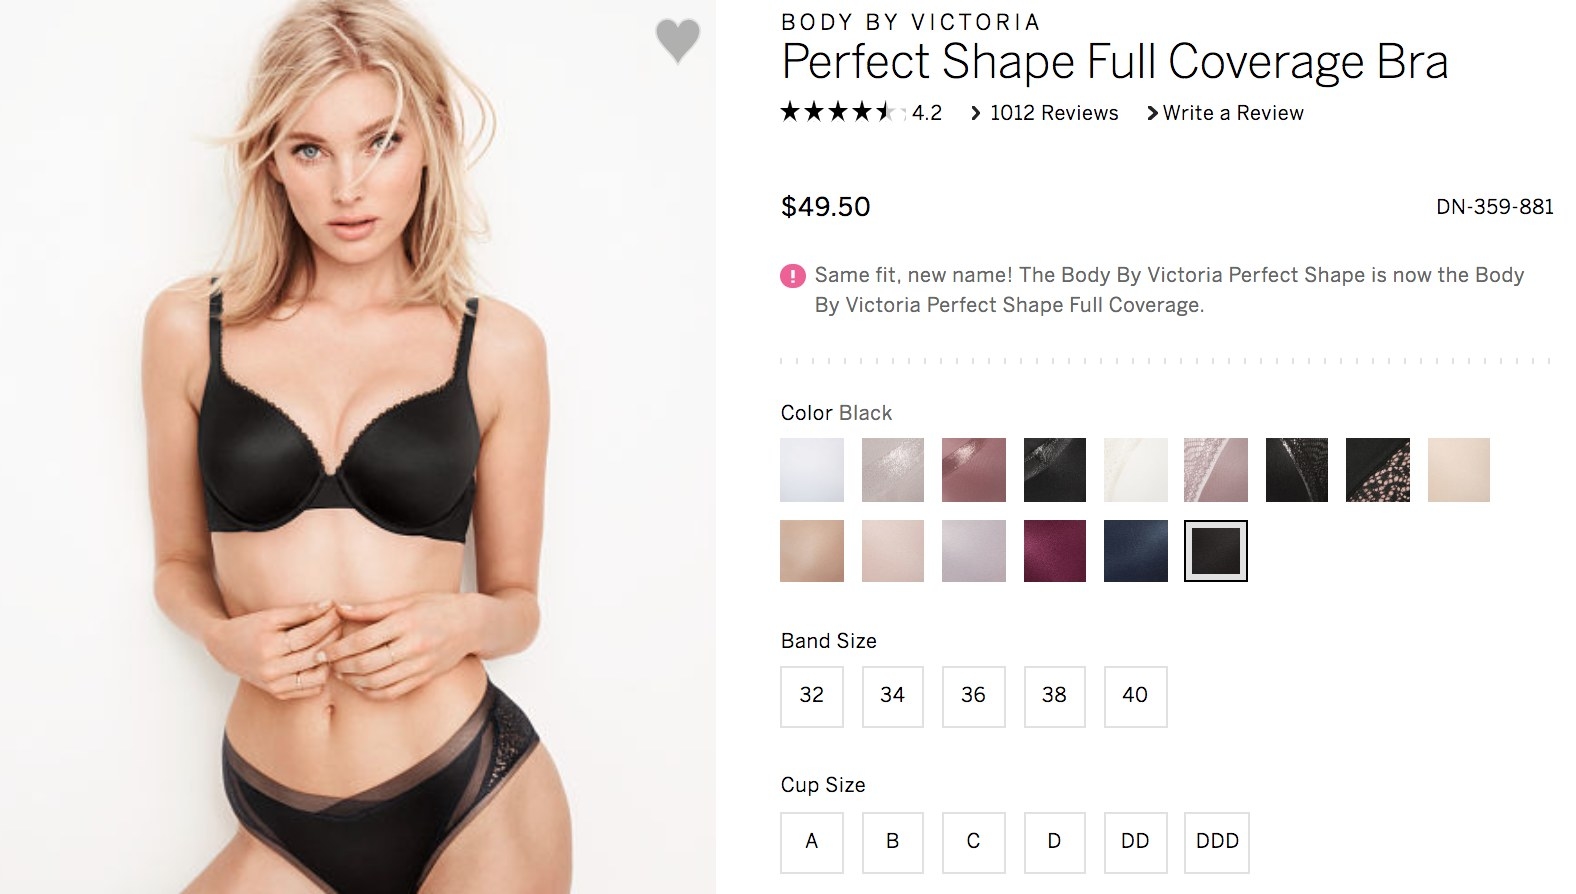 Professional Bra Fittings Can Actually Help How You Feel About